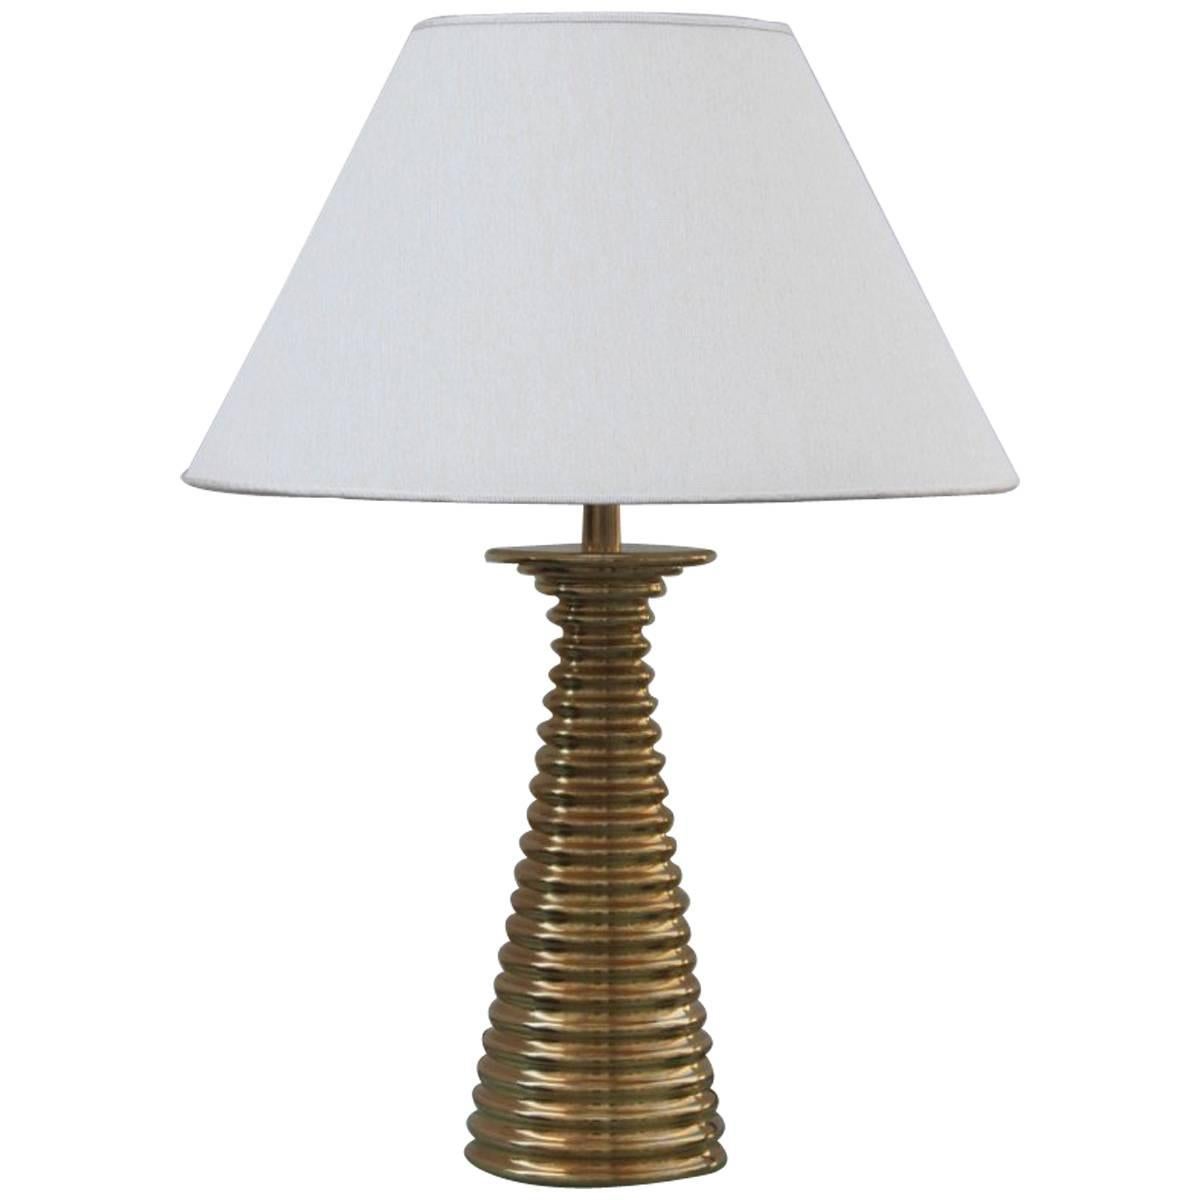 Italian Table Lamp in 1970s Brass sculpture Fabric dome.